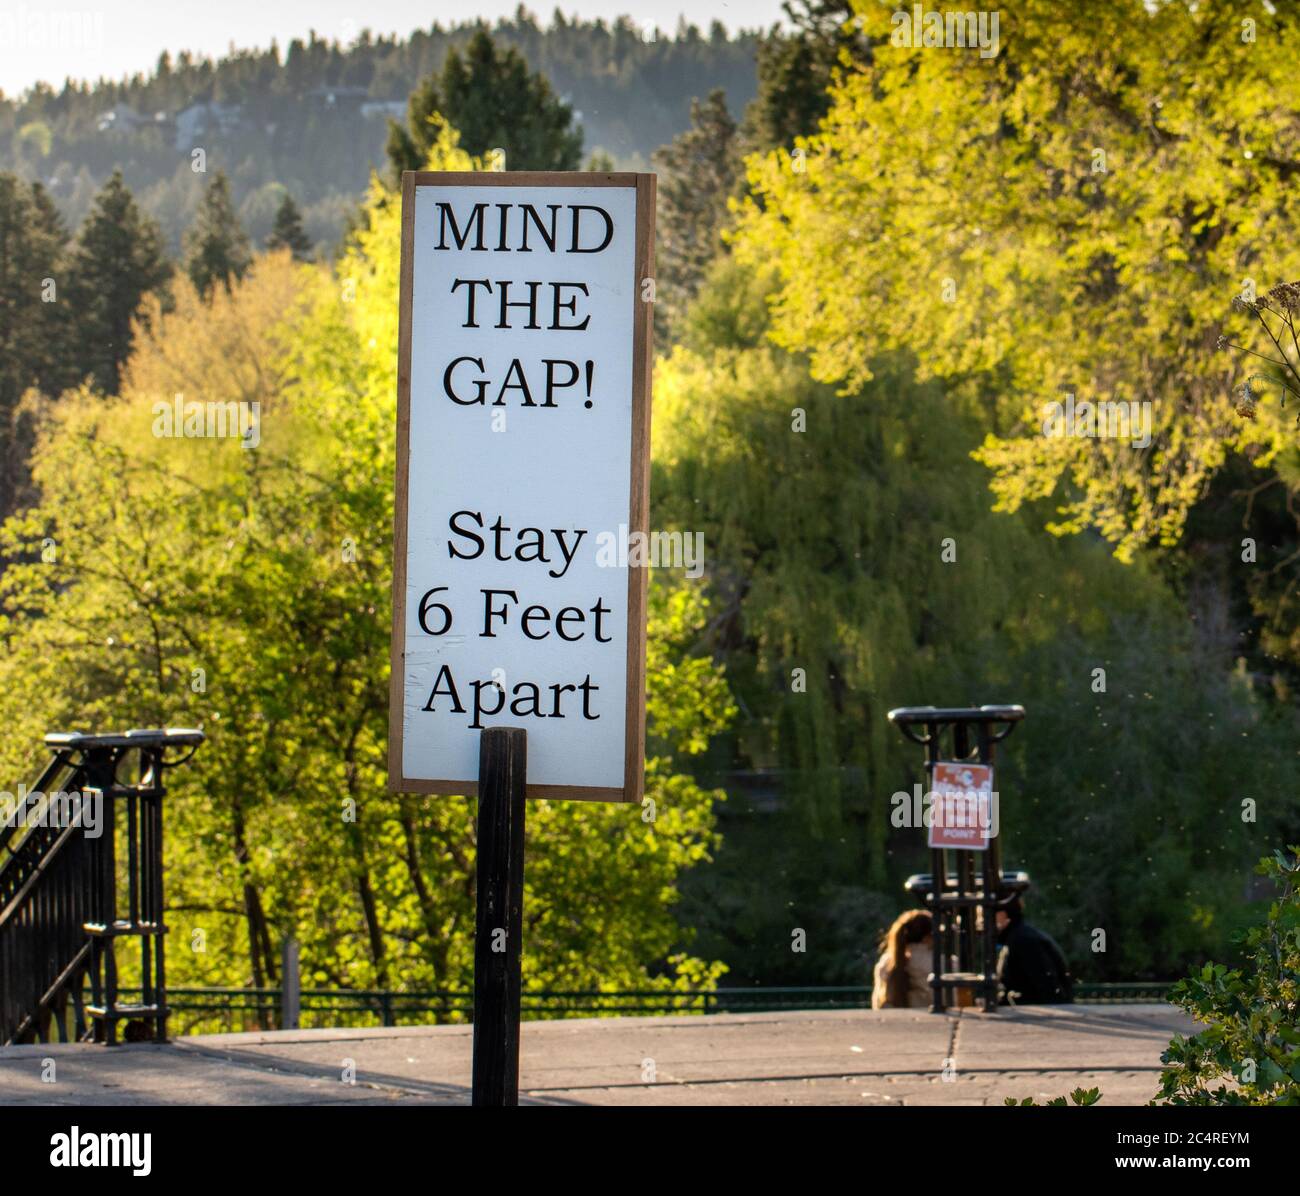 Social distancing sign reads Mind The Gap at Bend Oregon park entrance while two people sit closely next to each other. Stock Photo